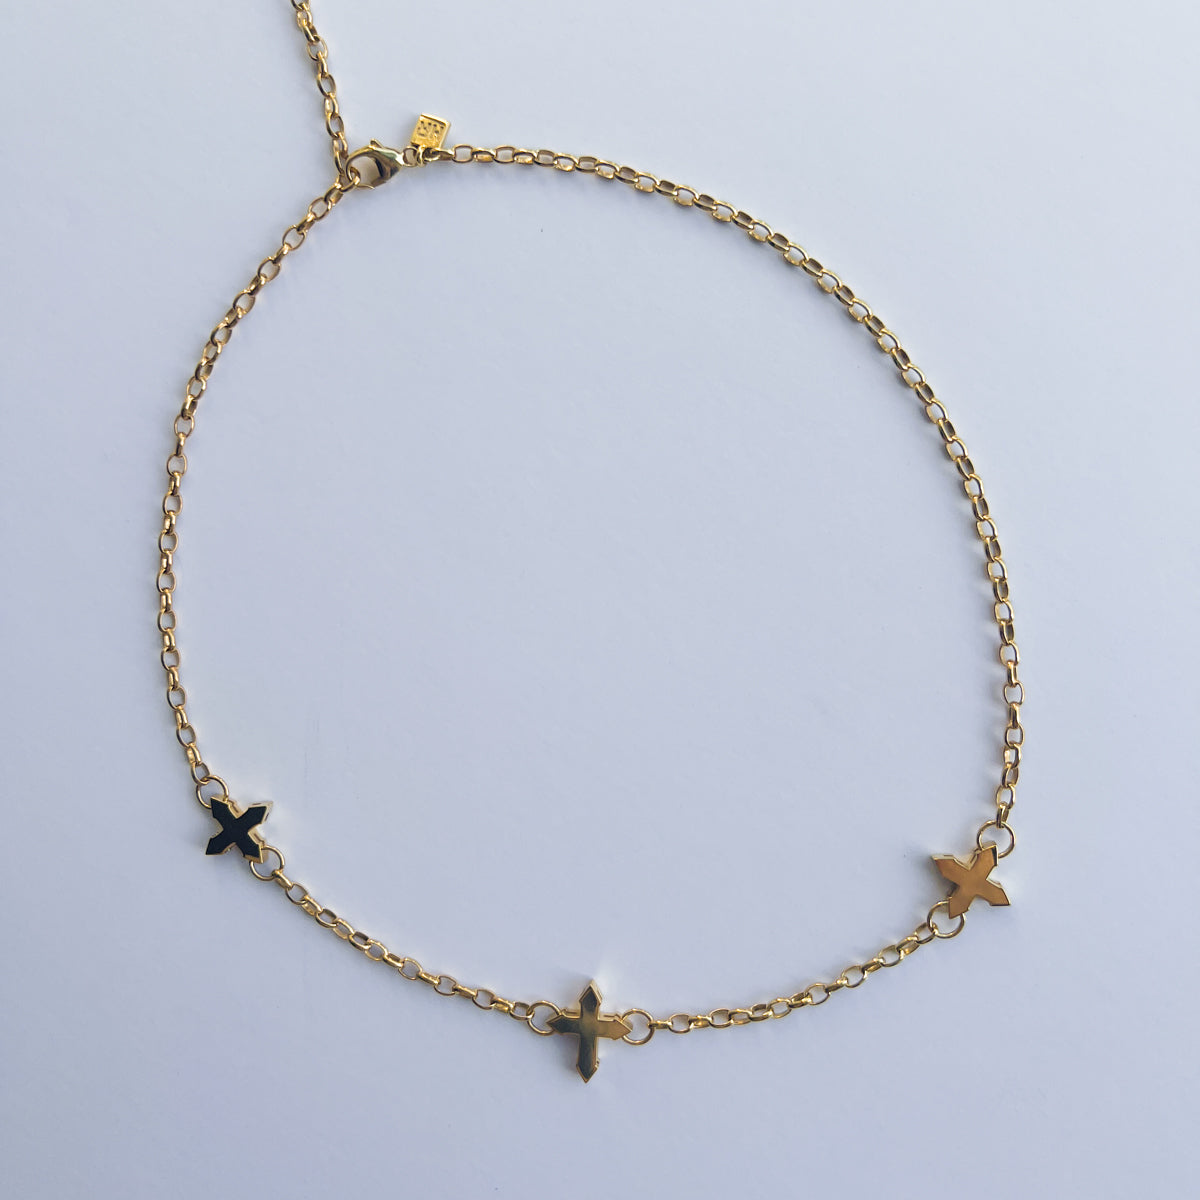 NECKLACE "TRINITY" / GOLD-PLATED SILVER